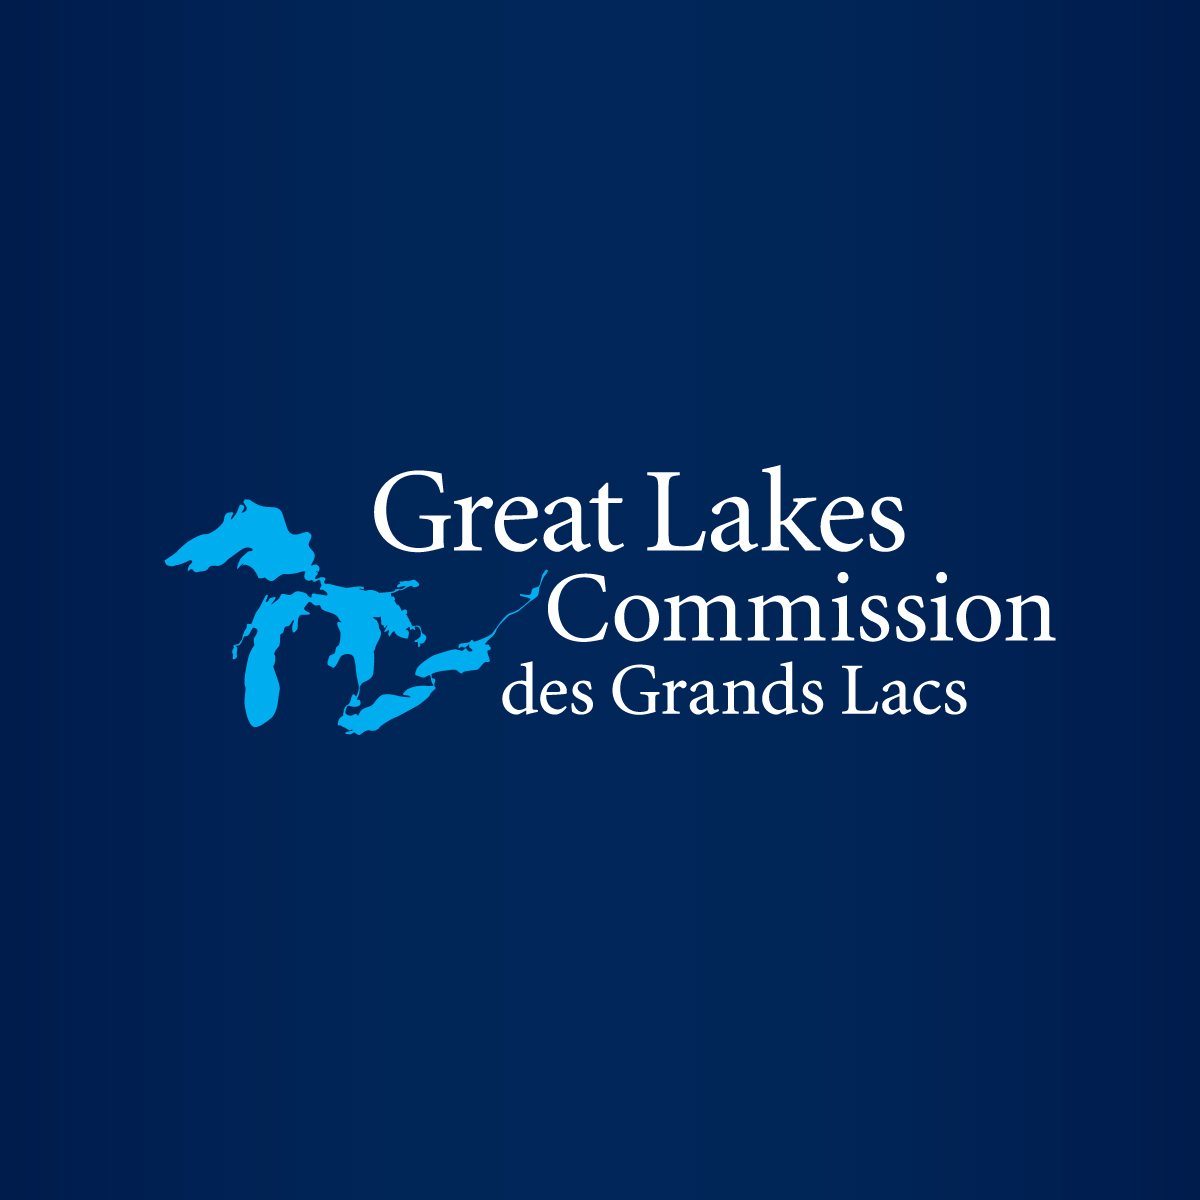 Request for Proposals: Great Lakes Sediment and Nutrient Reduction Program